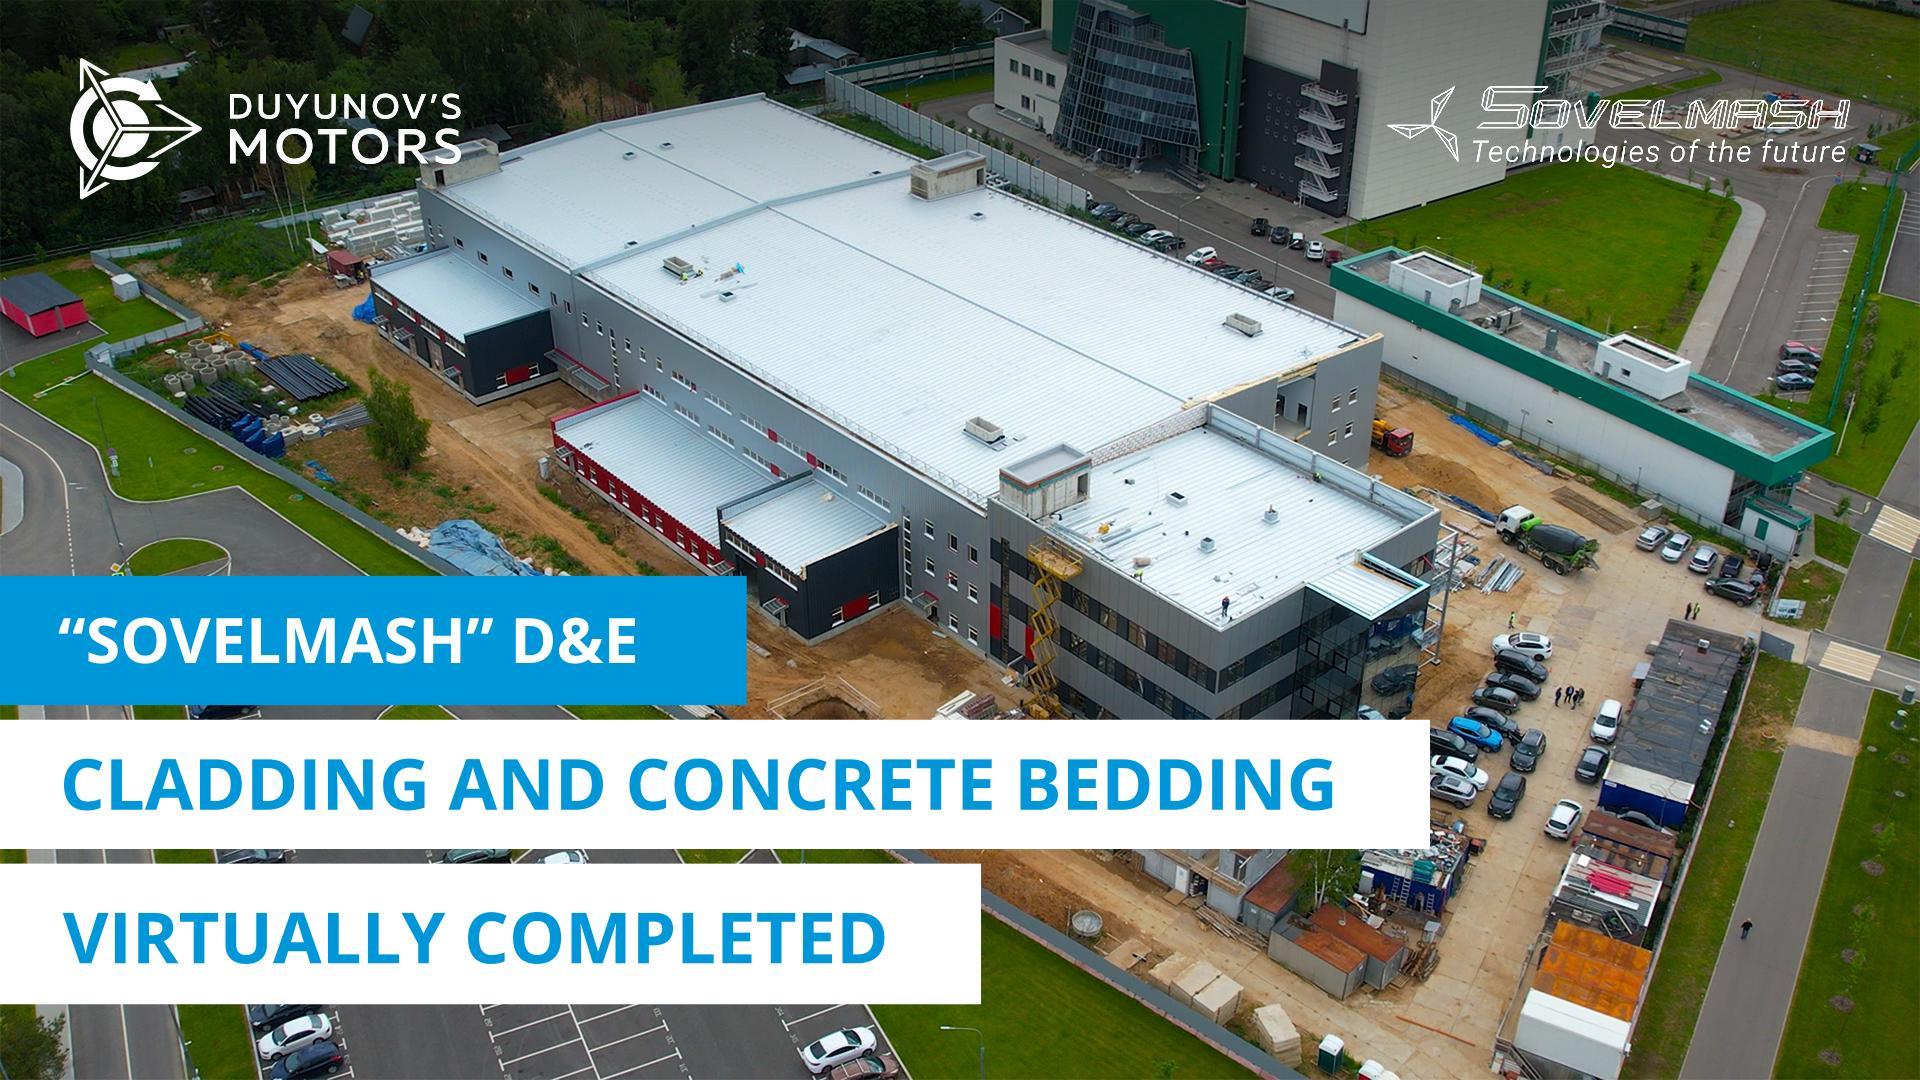 "Sovelmash" D&E: cladding and concrete bedding are virtually completed